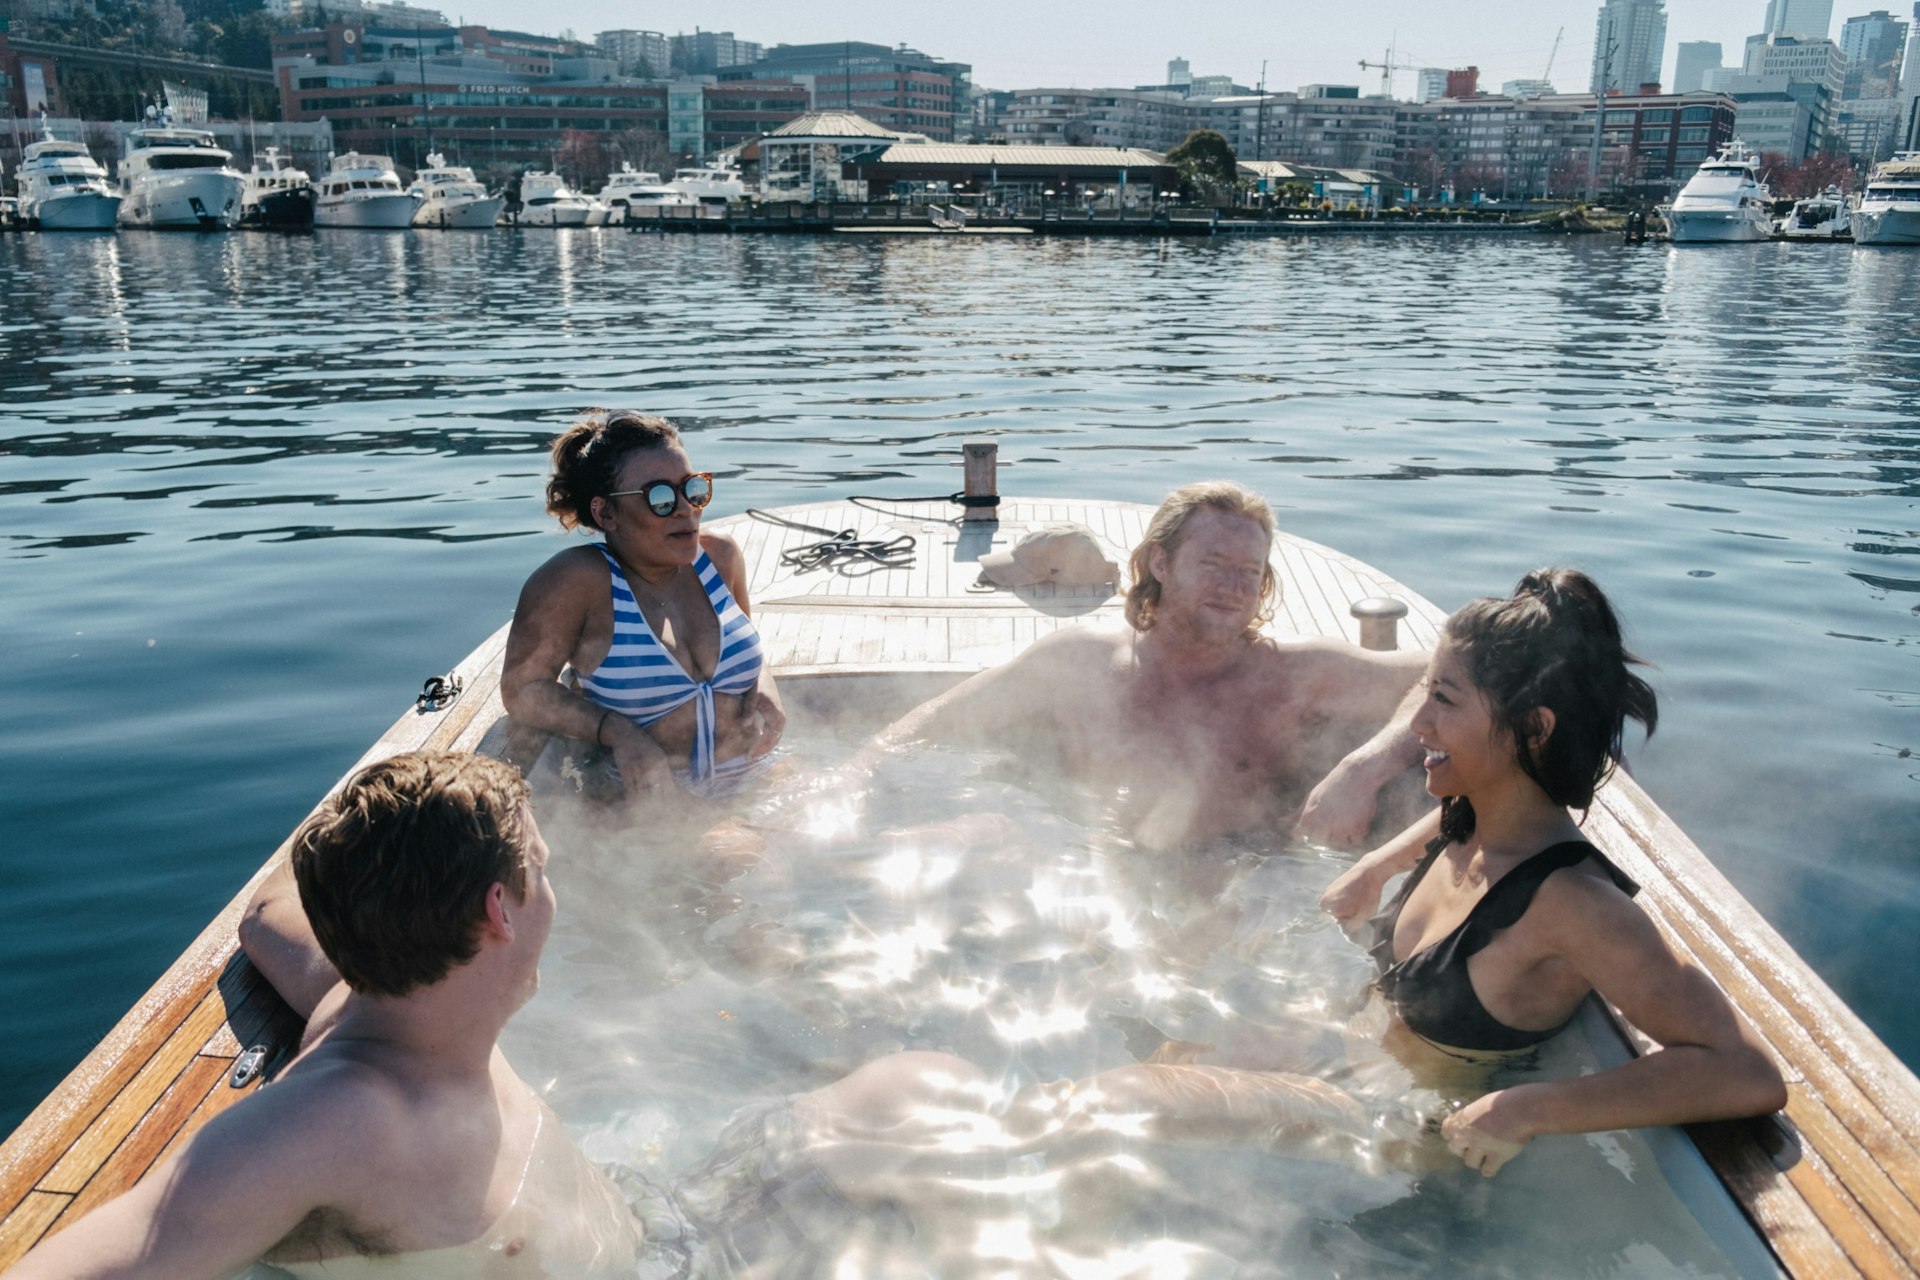 Four people in a hot tub boat on the water